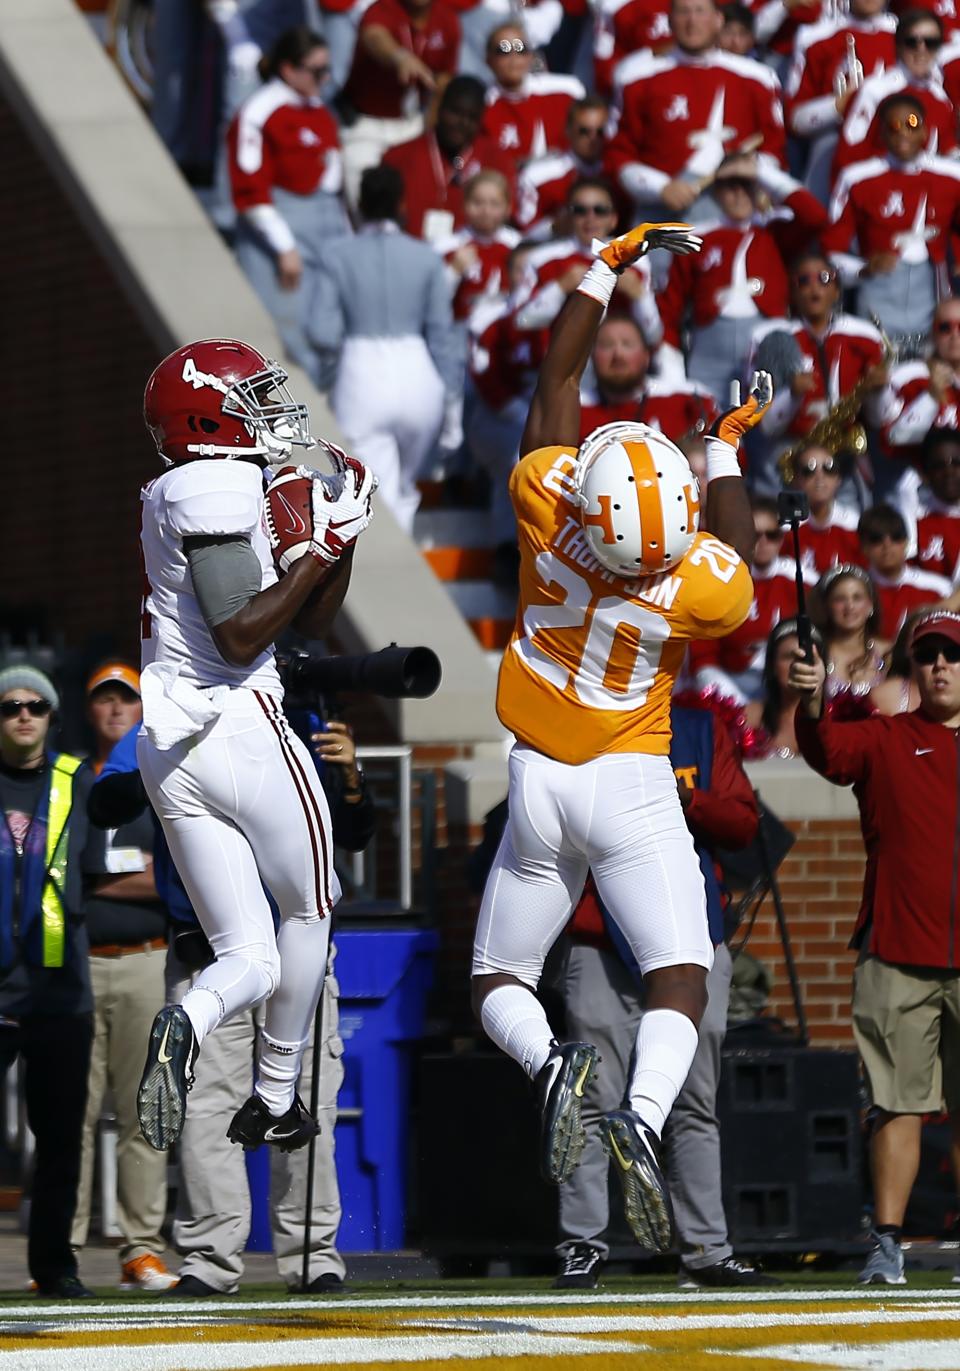 Alabama wide receiver Jerry Jeudy (4) catches a pass for a touchdown over Tennessee defensive back Bryce Thompson (20) in the first half of an NCAA college football game Saturday, Oct. 20, 2018, in Knoxville, Tenn. (AP Photo/Wade Payne)